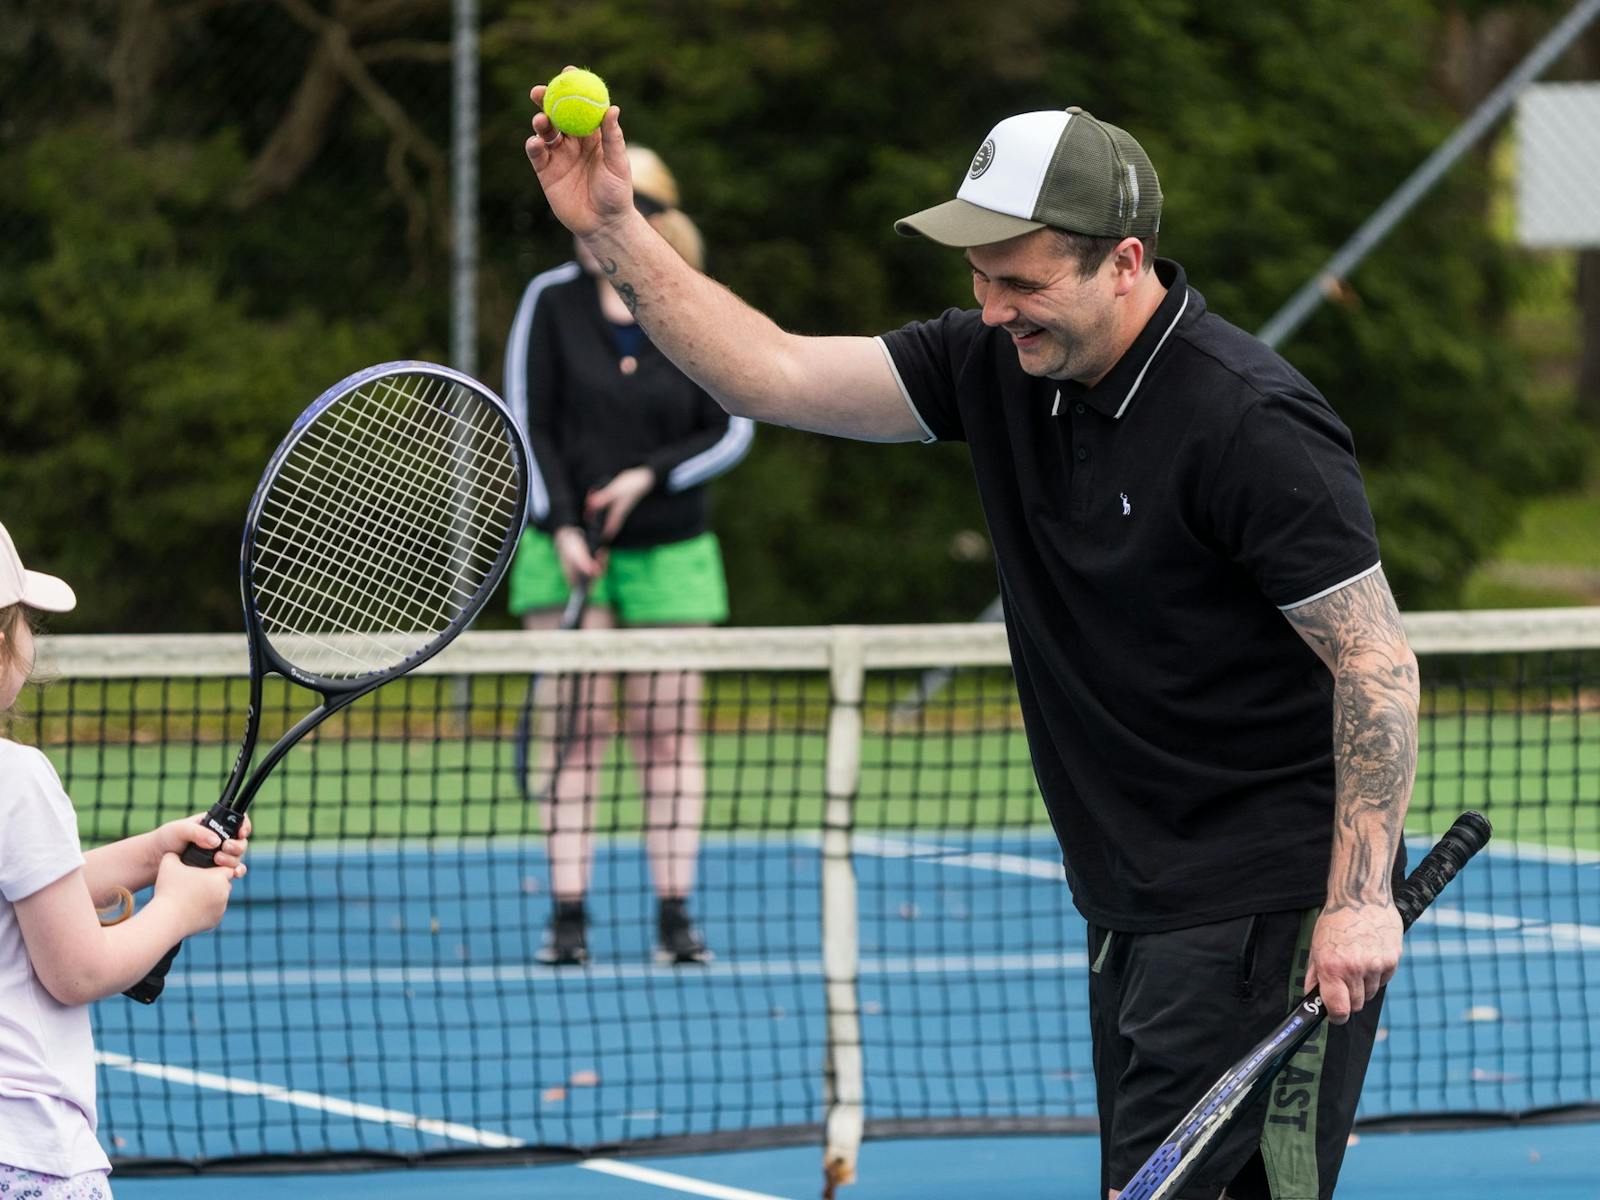 Father showing daughter where to hit the ball with her racquet on tennis court